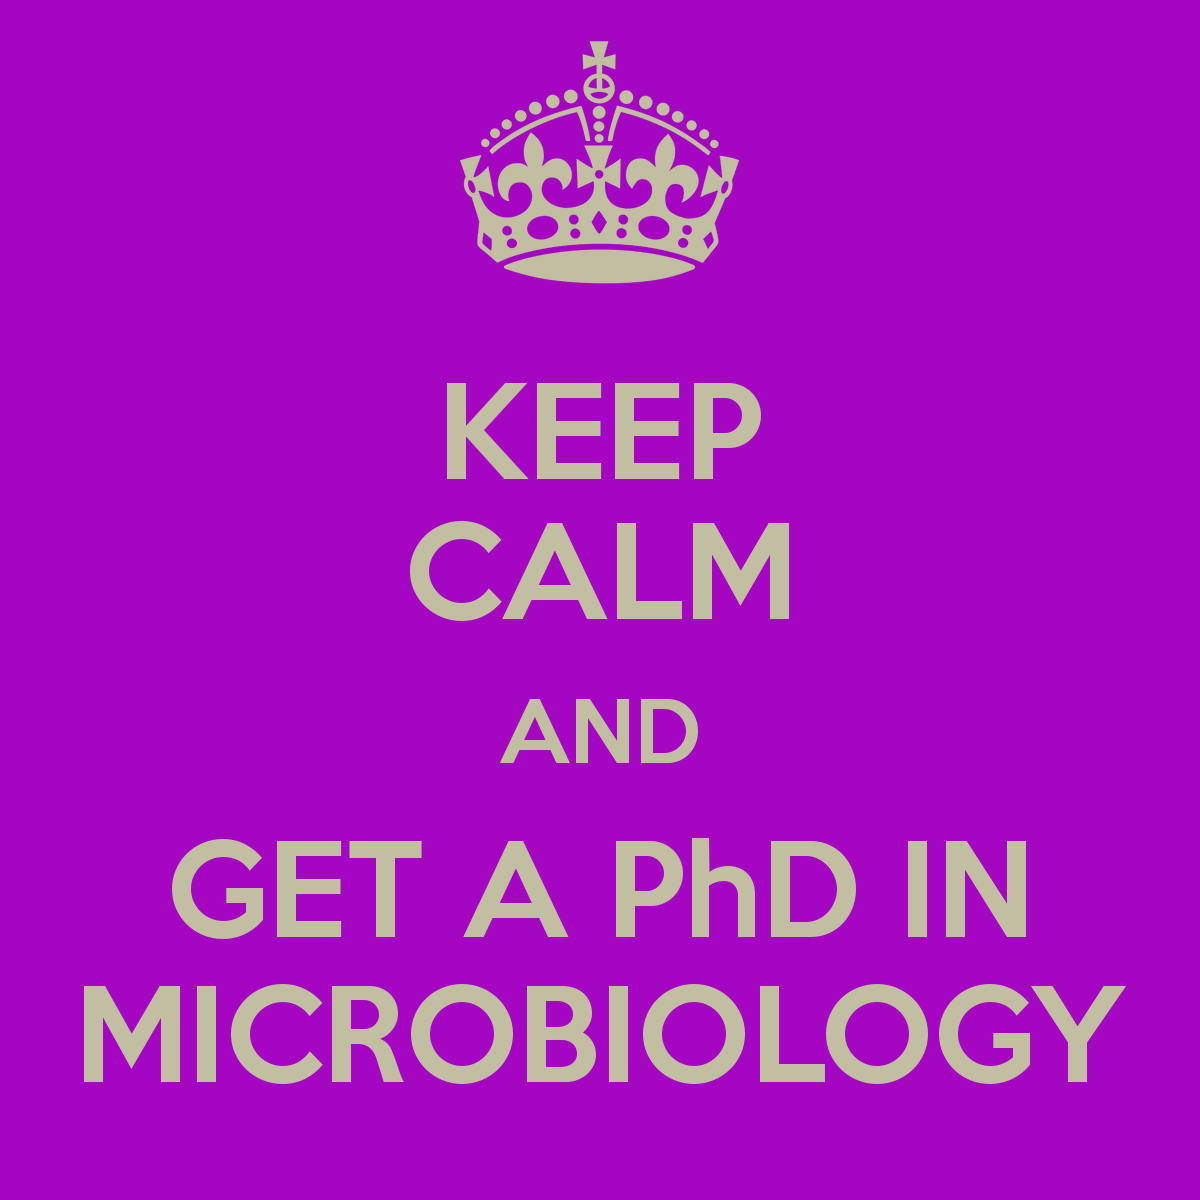 Keep Calm And Get A Phd In Microbiology - Graphic Design - HD Wallpaper 